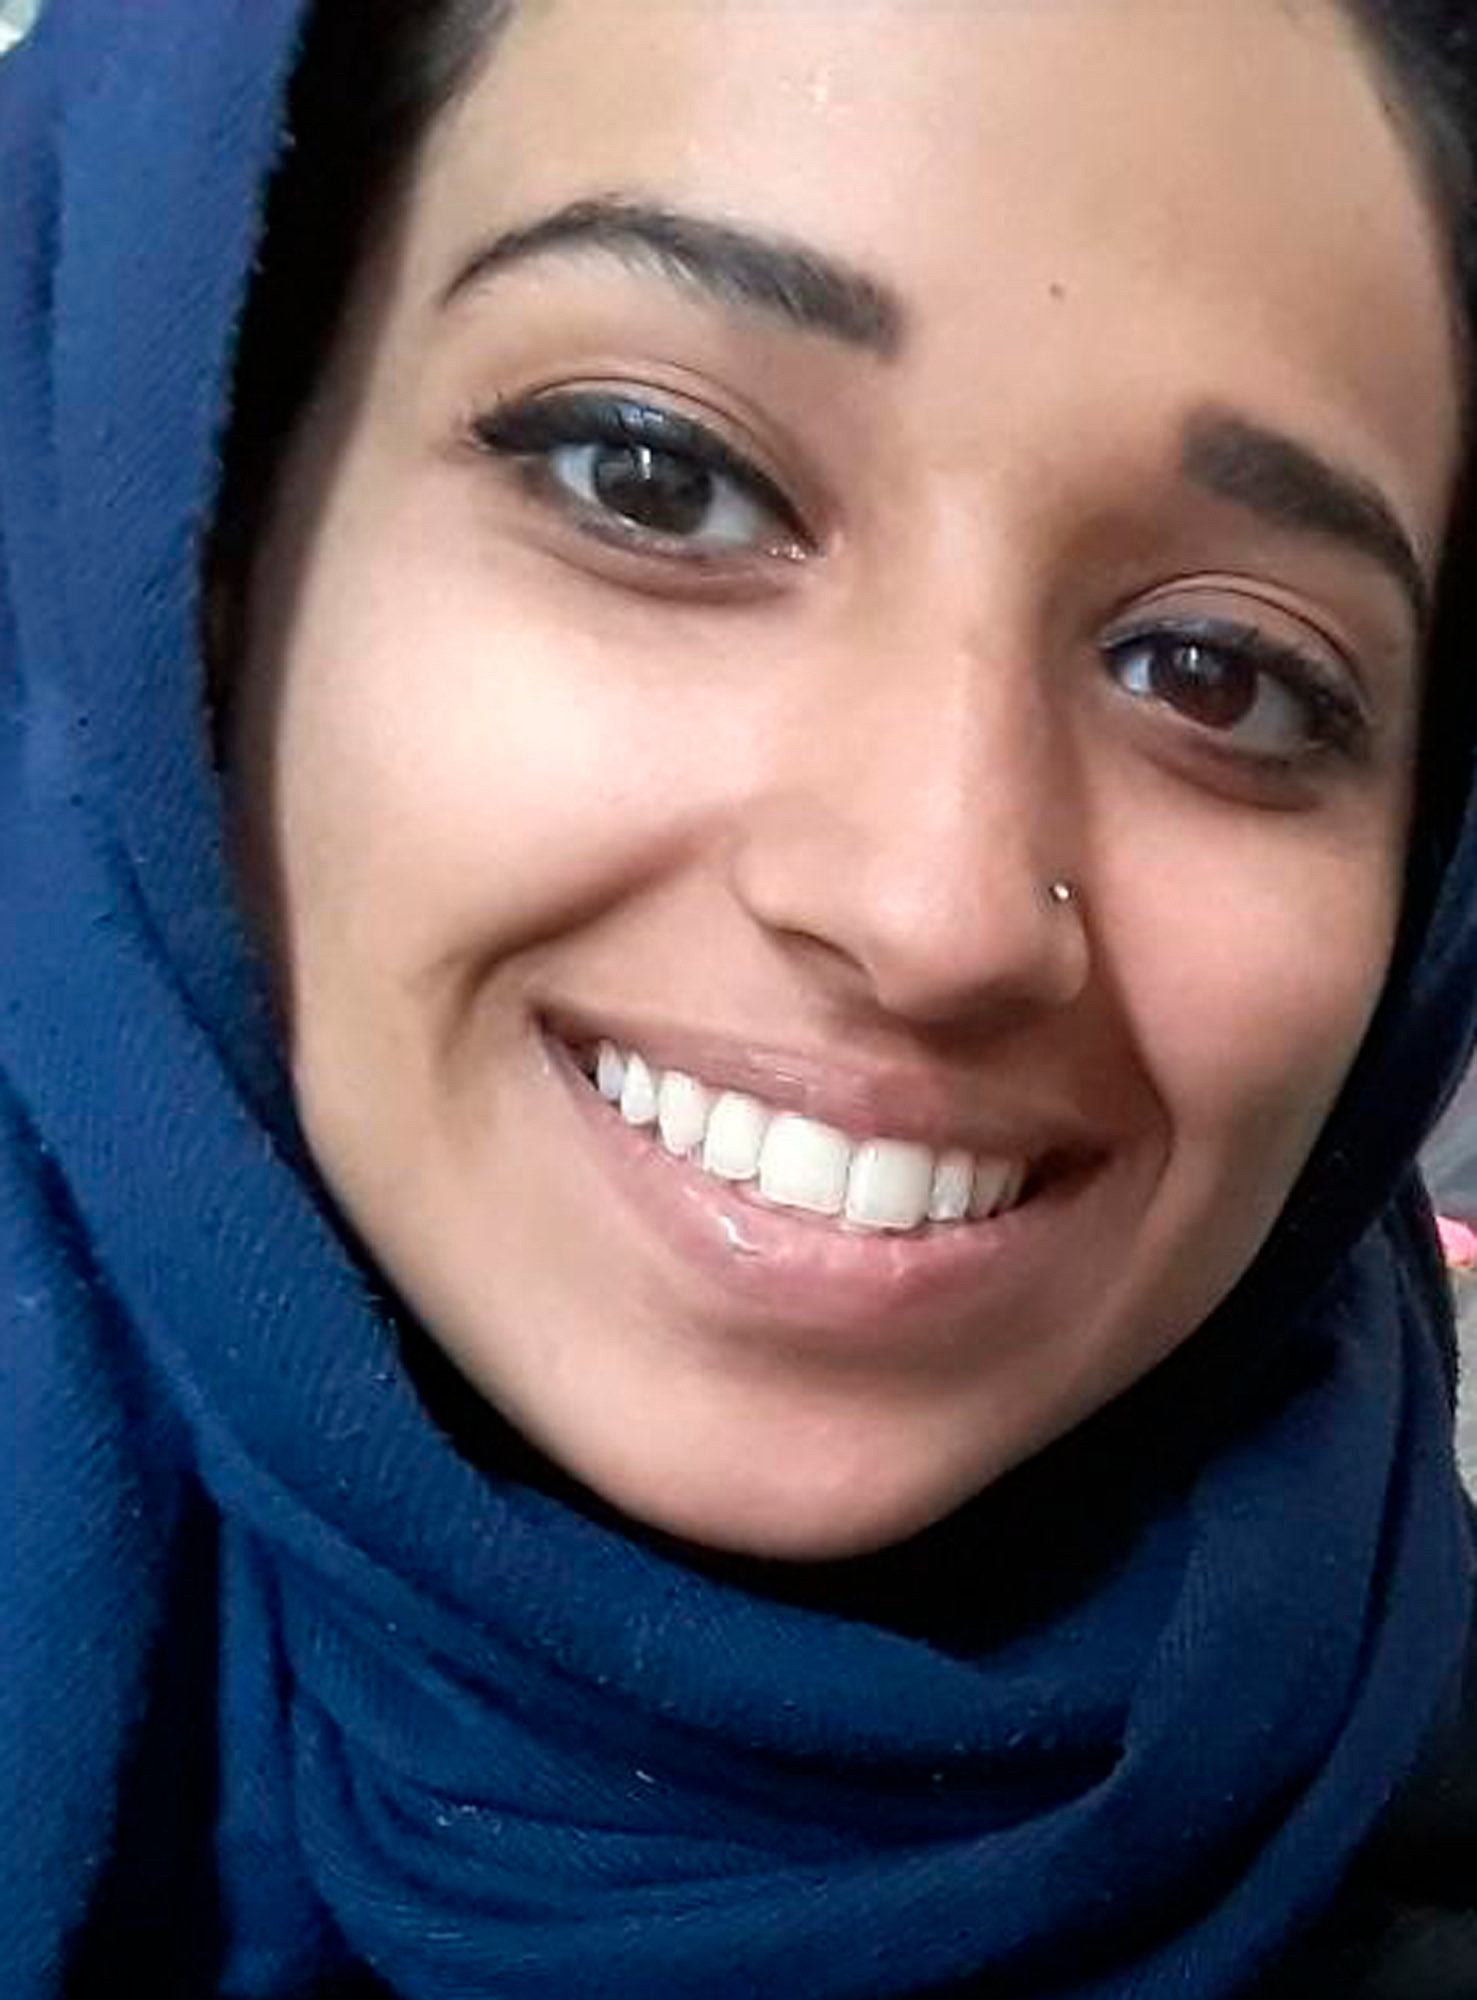 Hoda Muthana/Attorney Hassan Shibly via APHoda Muthana is an Alabama woman who left home to join the Islamic State after becoming radicalized online.